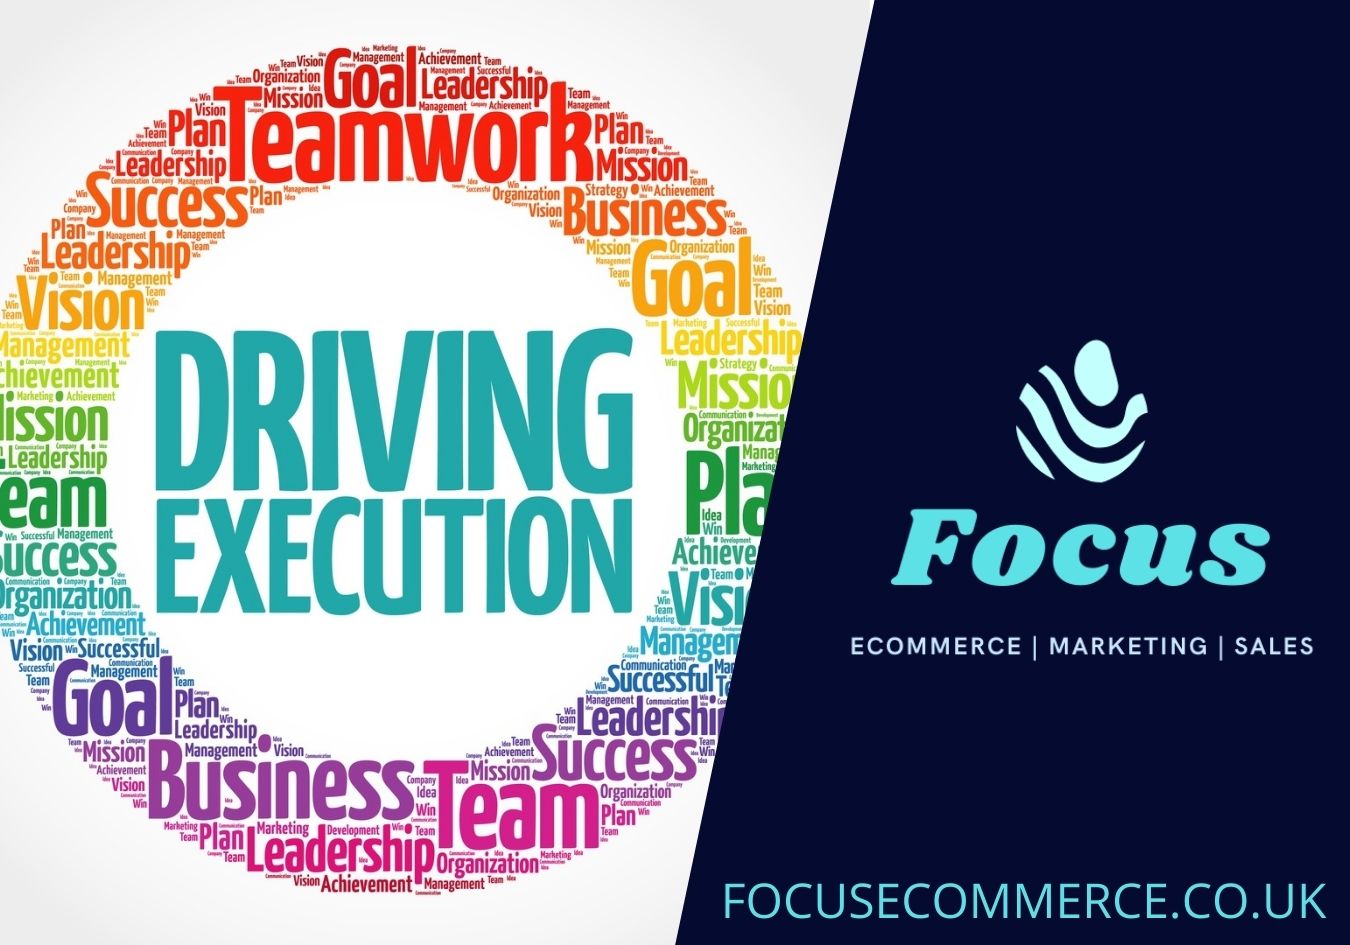 Marketing Services | Driving Execution|Focus Ecommerce & Marketing